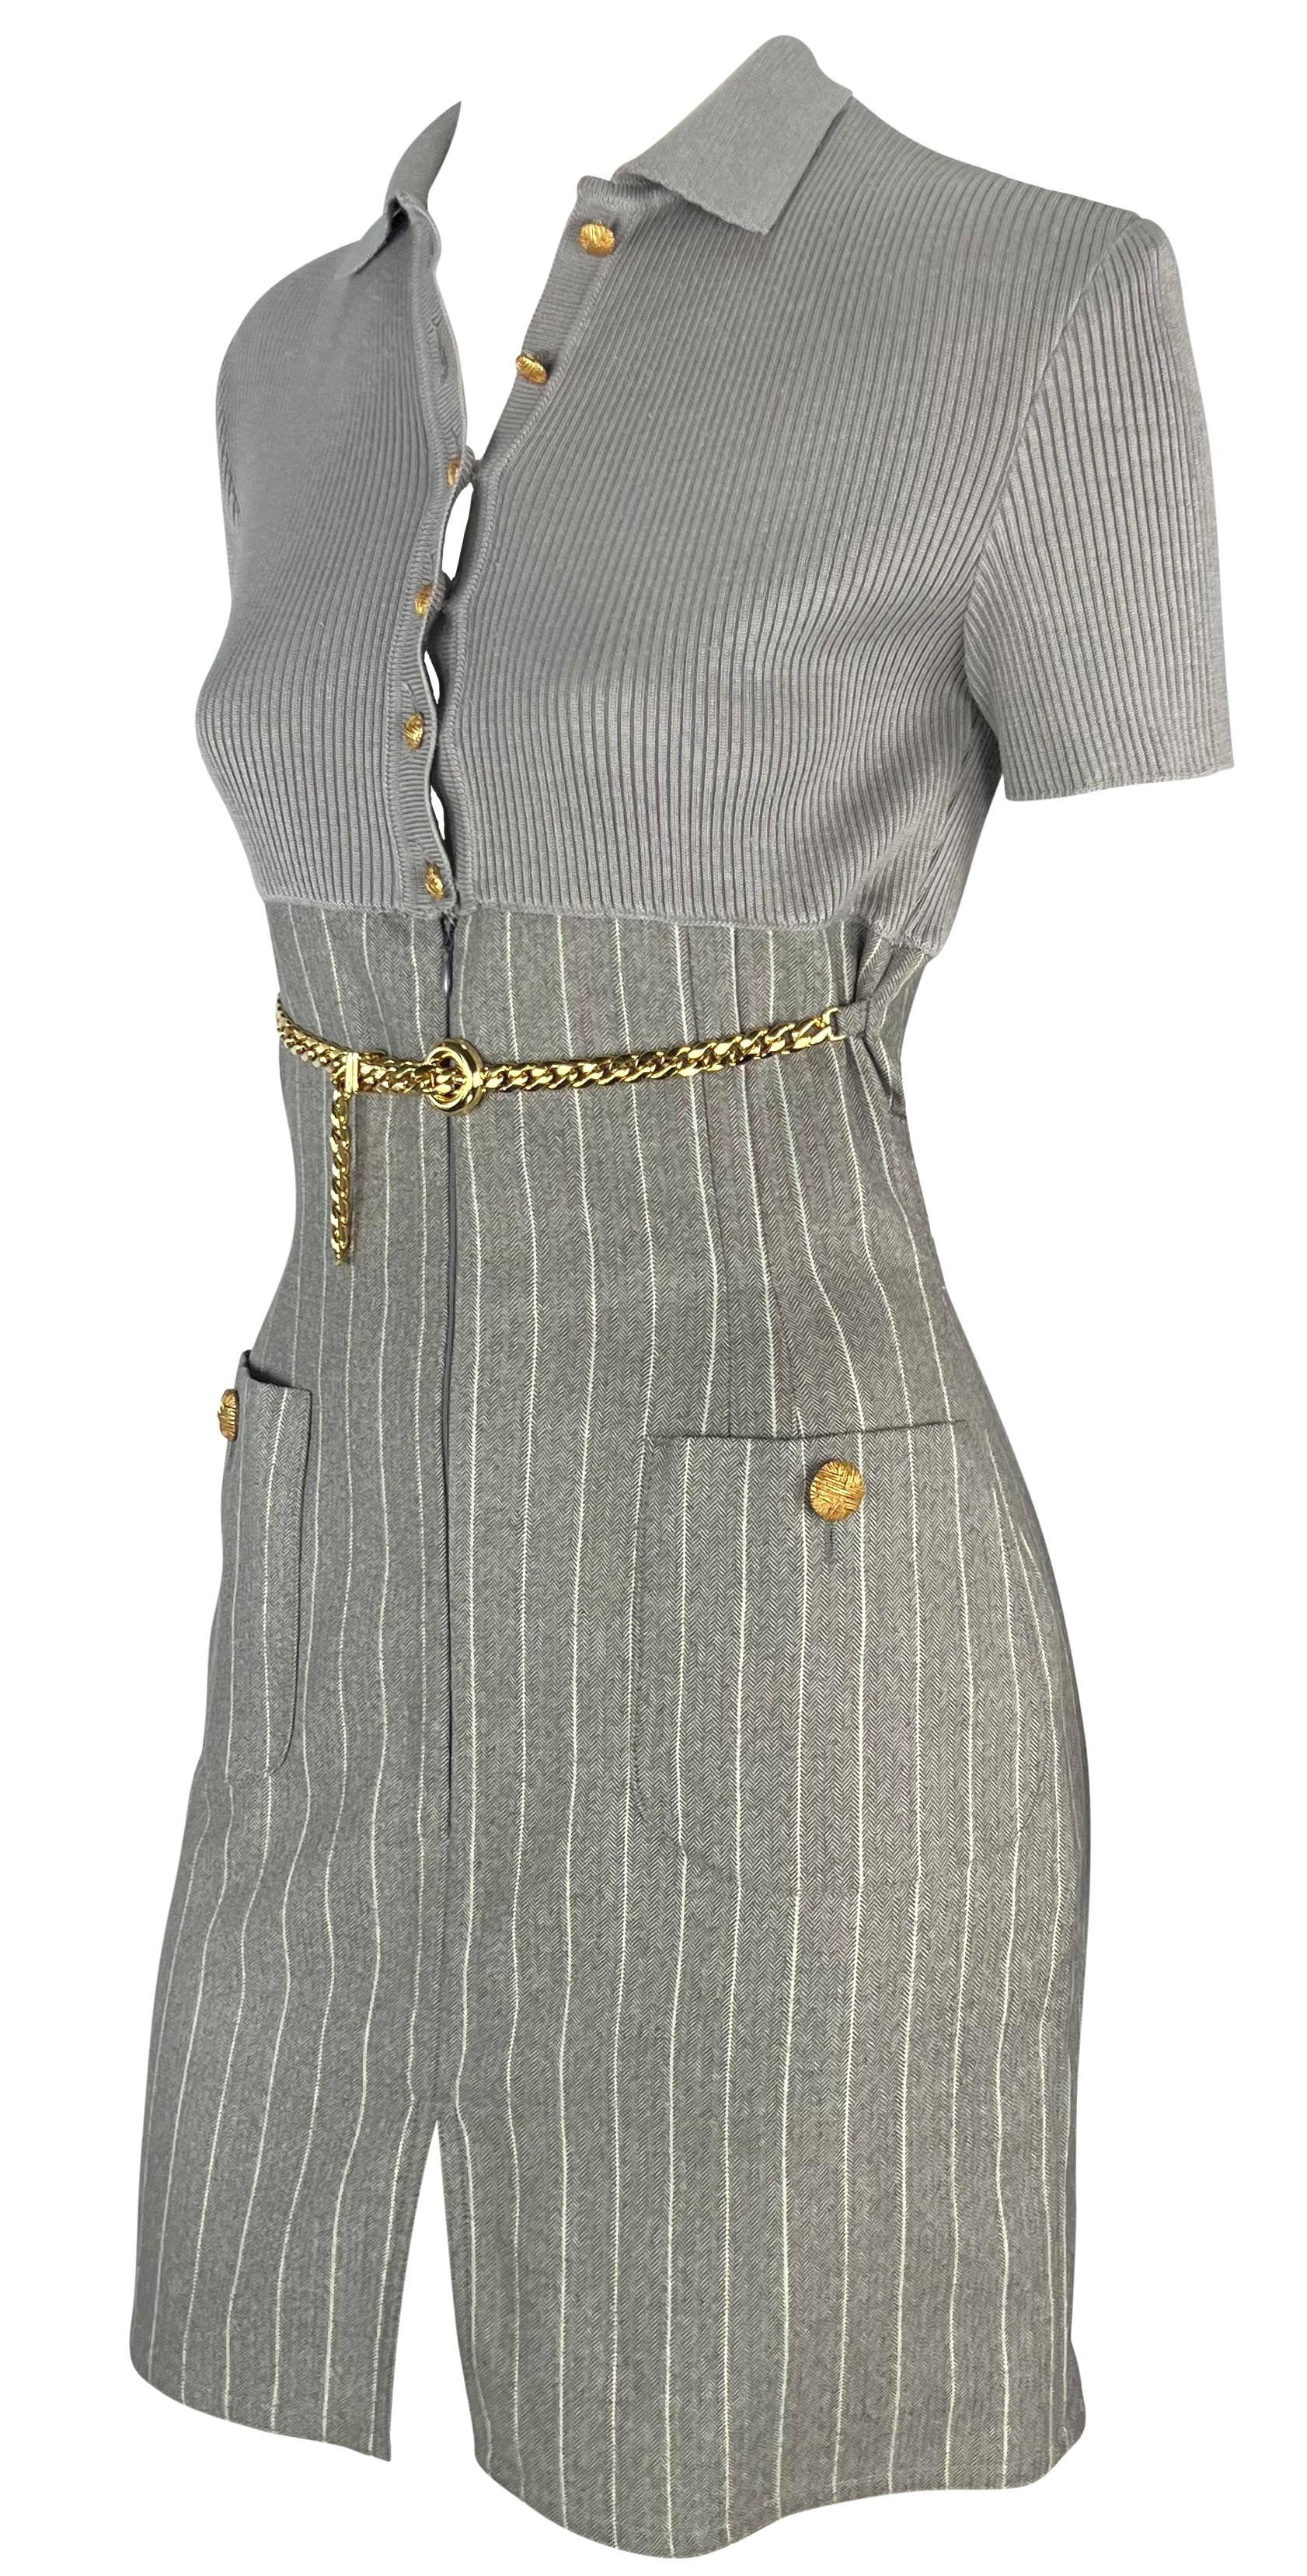 From the 1990s, this grey Valentino collared mini dress features a fold-over collar, button-down closure at the bust, and short sleeves. The top of the dress is knit and perfectly ties into the pin stripe skirt. This corporate core mini dress is